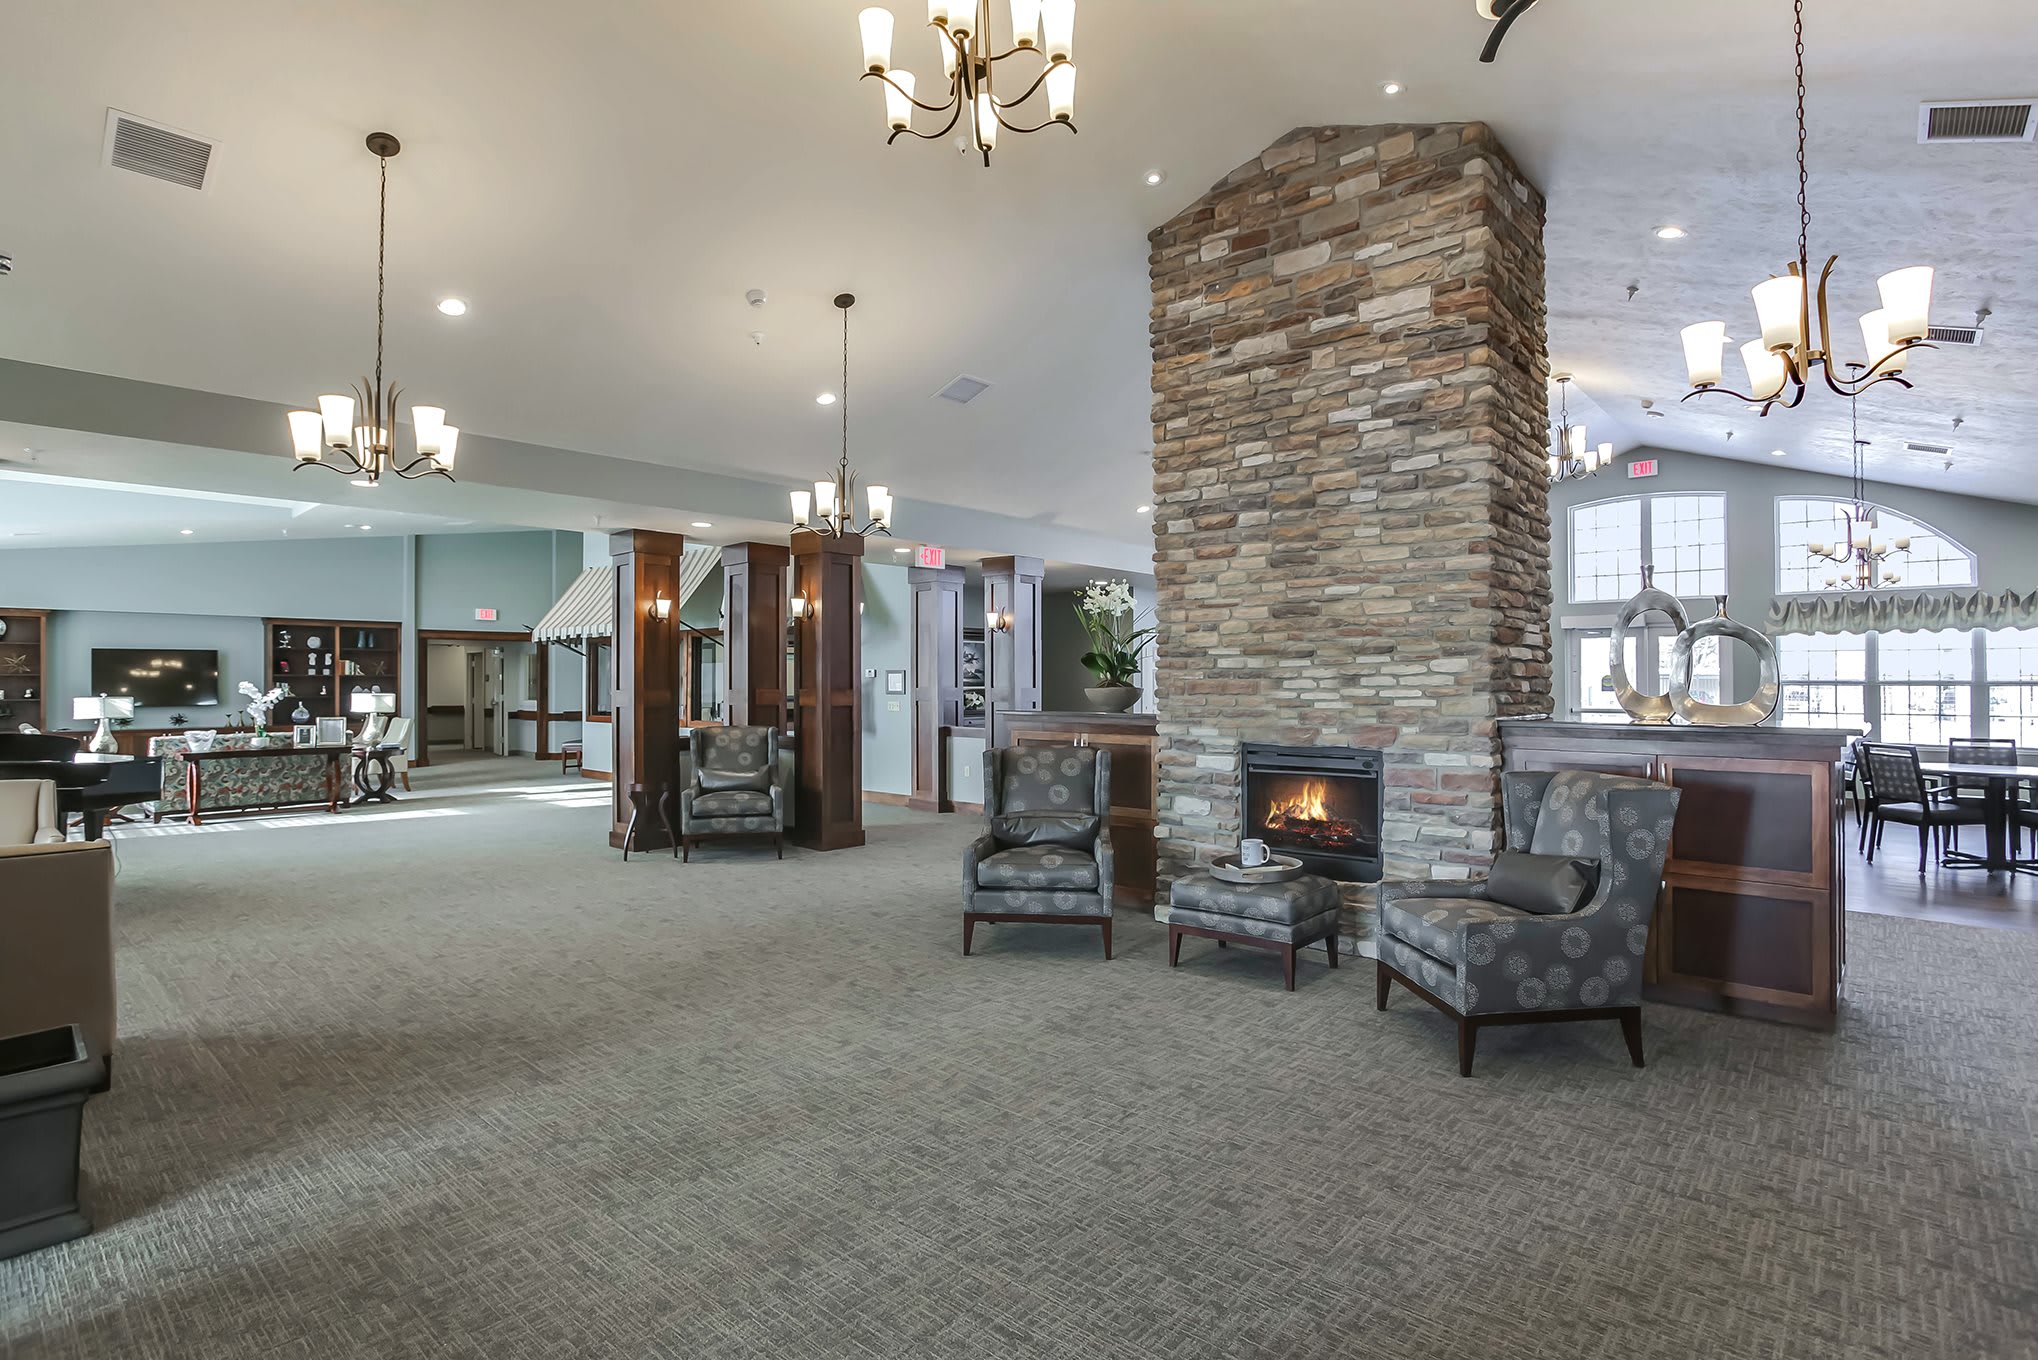 Grand Village Assisted Living & Memory Care lobby